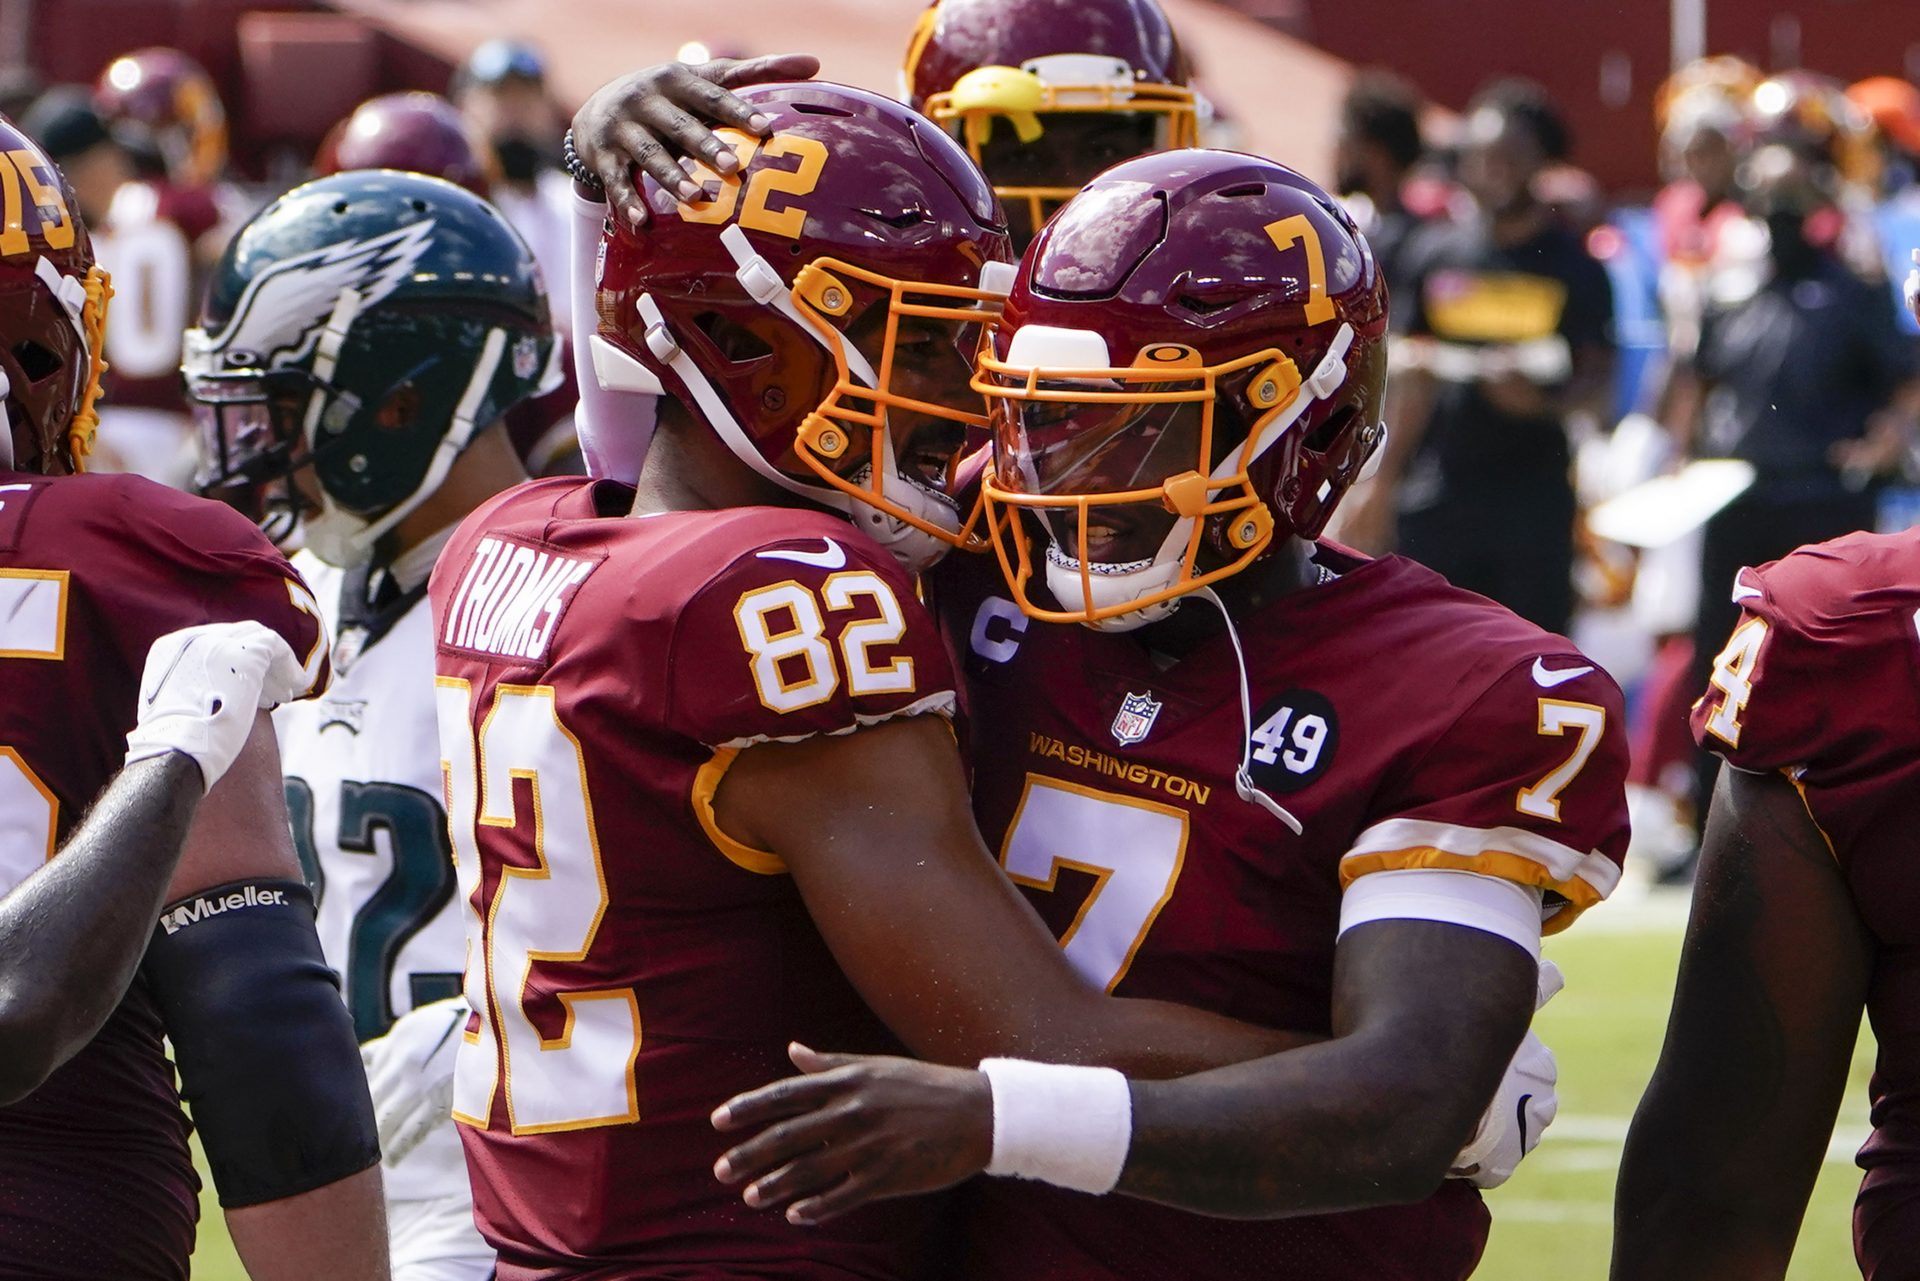 Washington Football Team tight end Logan Thomas (82) celebrates his touchdown against Philadelphia Eagles with teammate quarterback Dwayne Haskins (7), during the first half of an NFL football game, Sunday, Sept. 13, 2020, in Landover, Md.